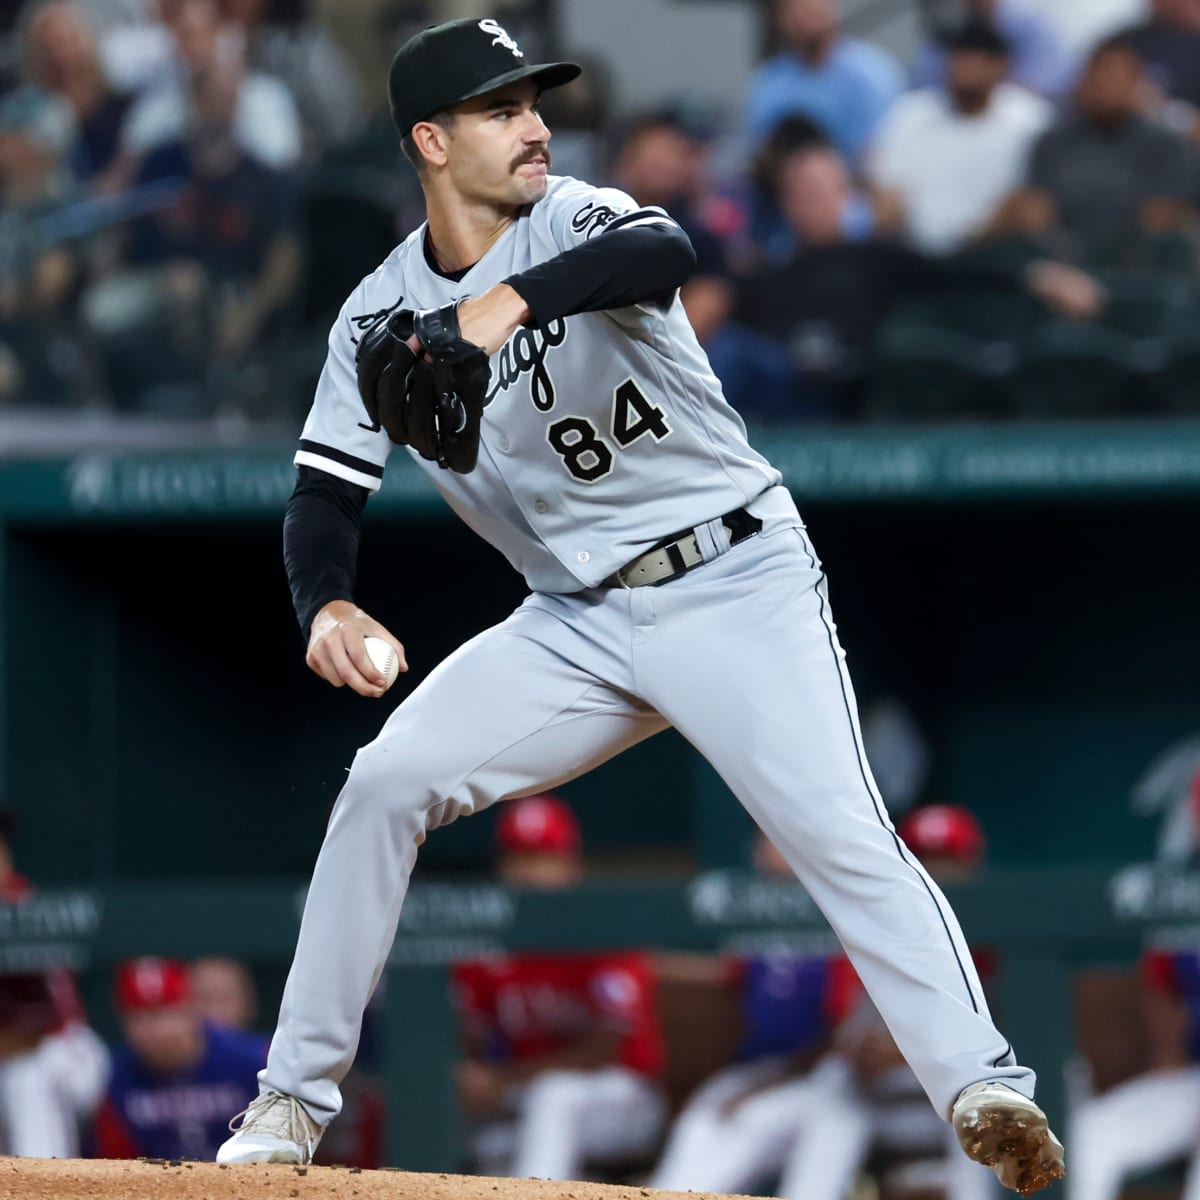 Cease wins for 1st time in almost 2 months as White Sox cool off Braves 8-1  - ABC News